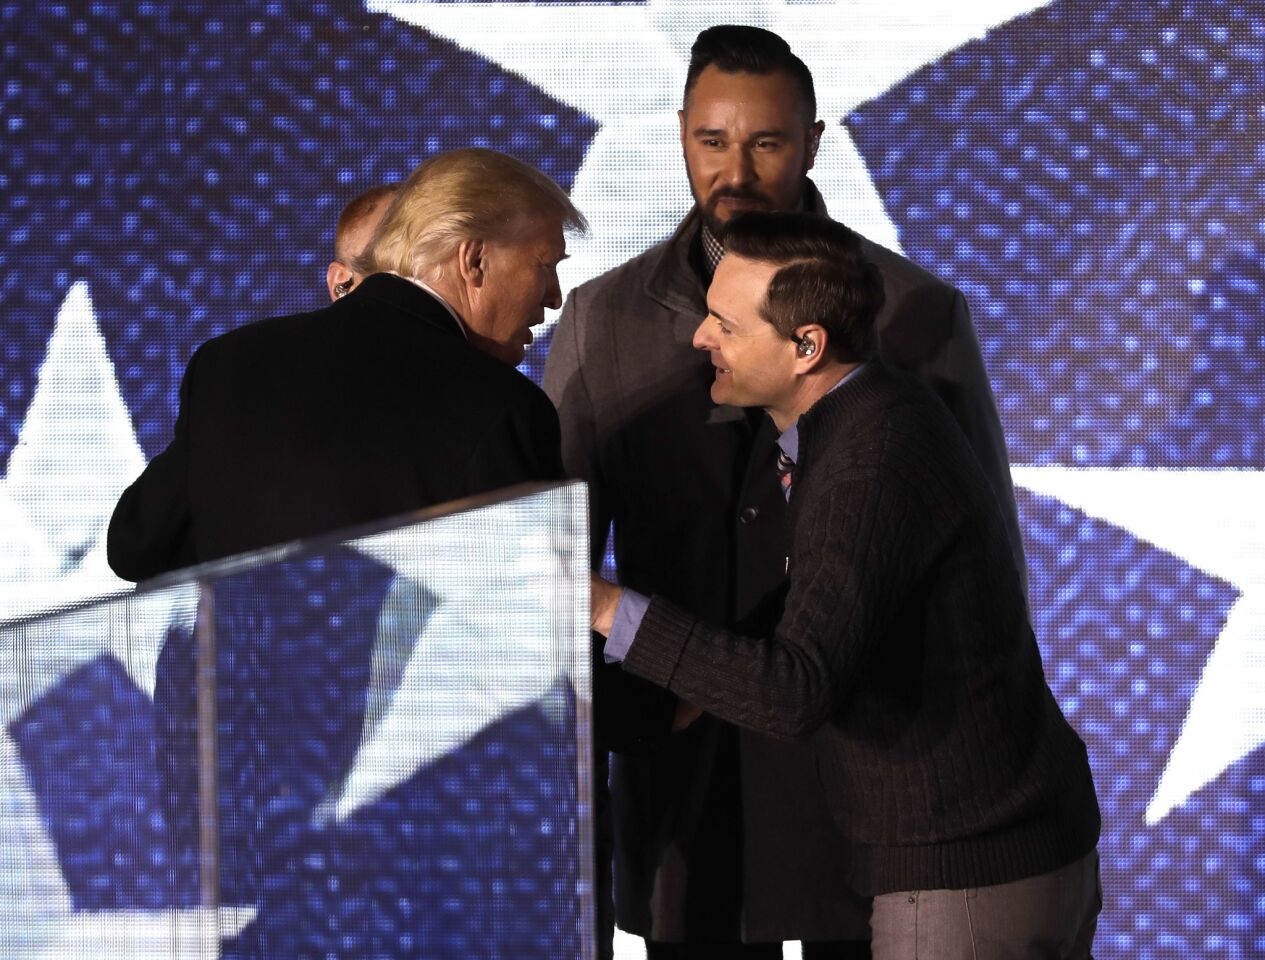 President-elect Donald Trump greets 3 Doors Down after they performed at a pre-Inaugural "Make America Great Again! Welcome Celebration" at the Lincoln Memorial on Thursday.